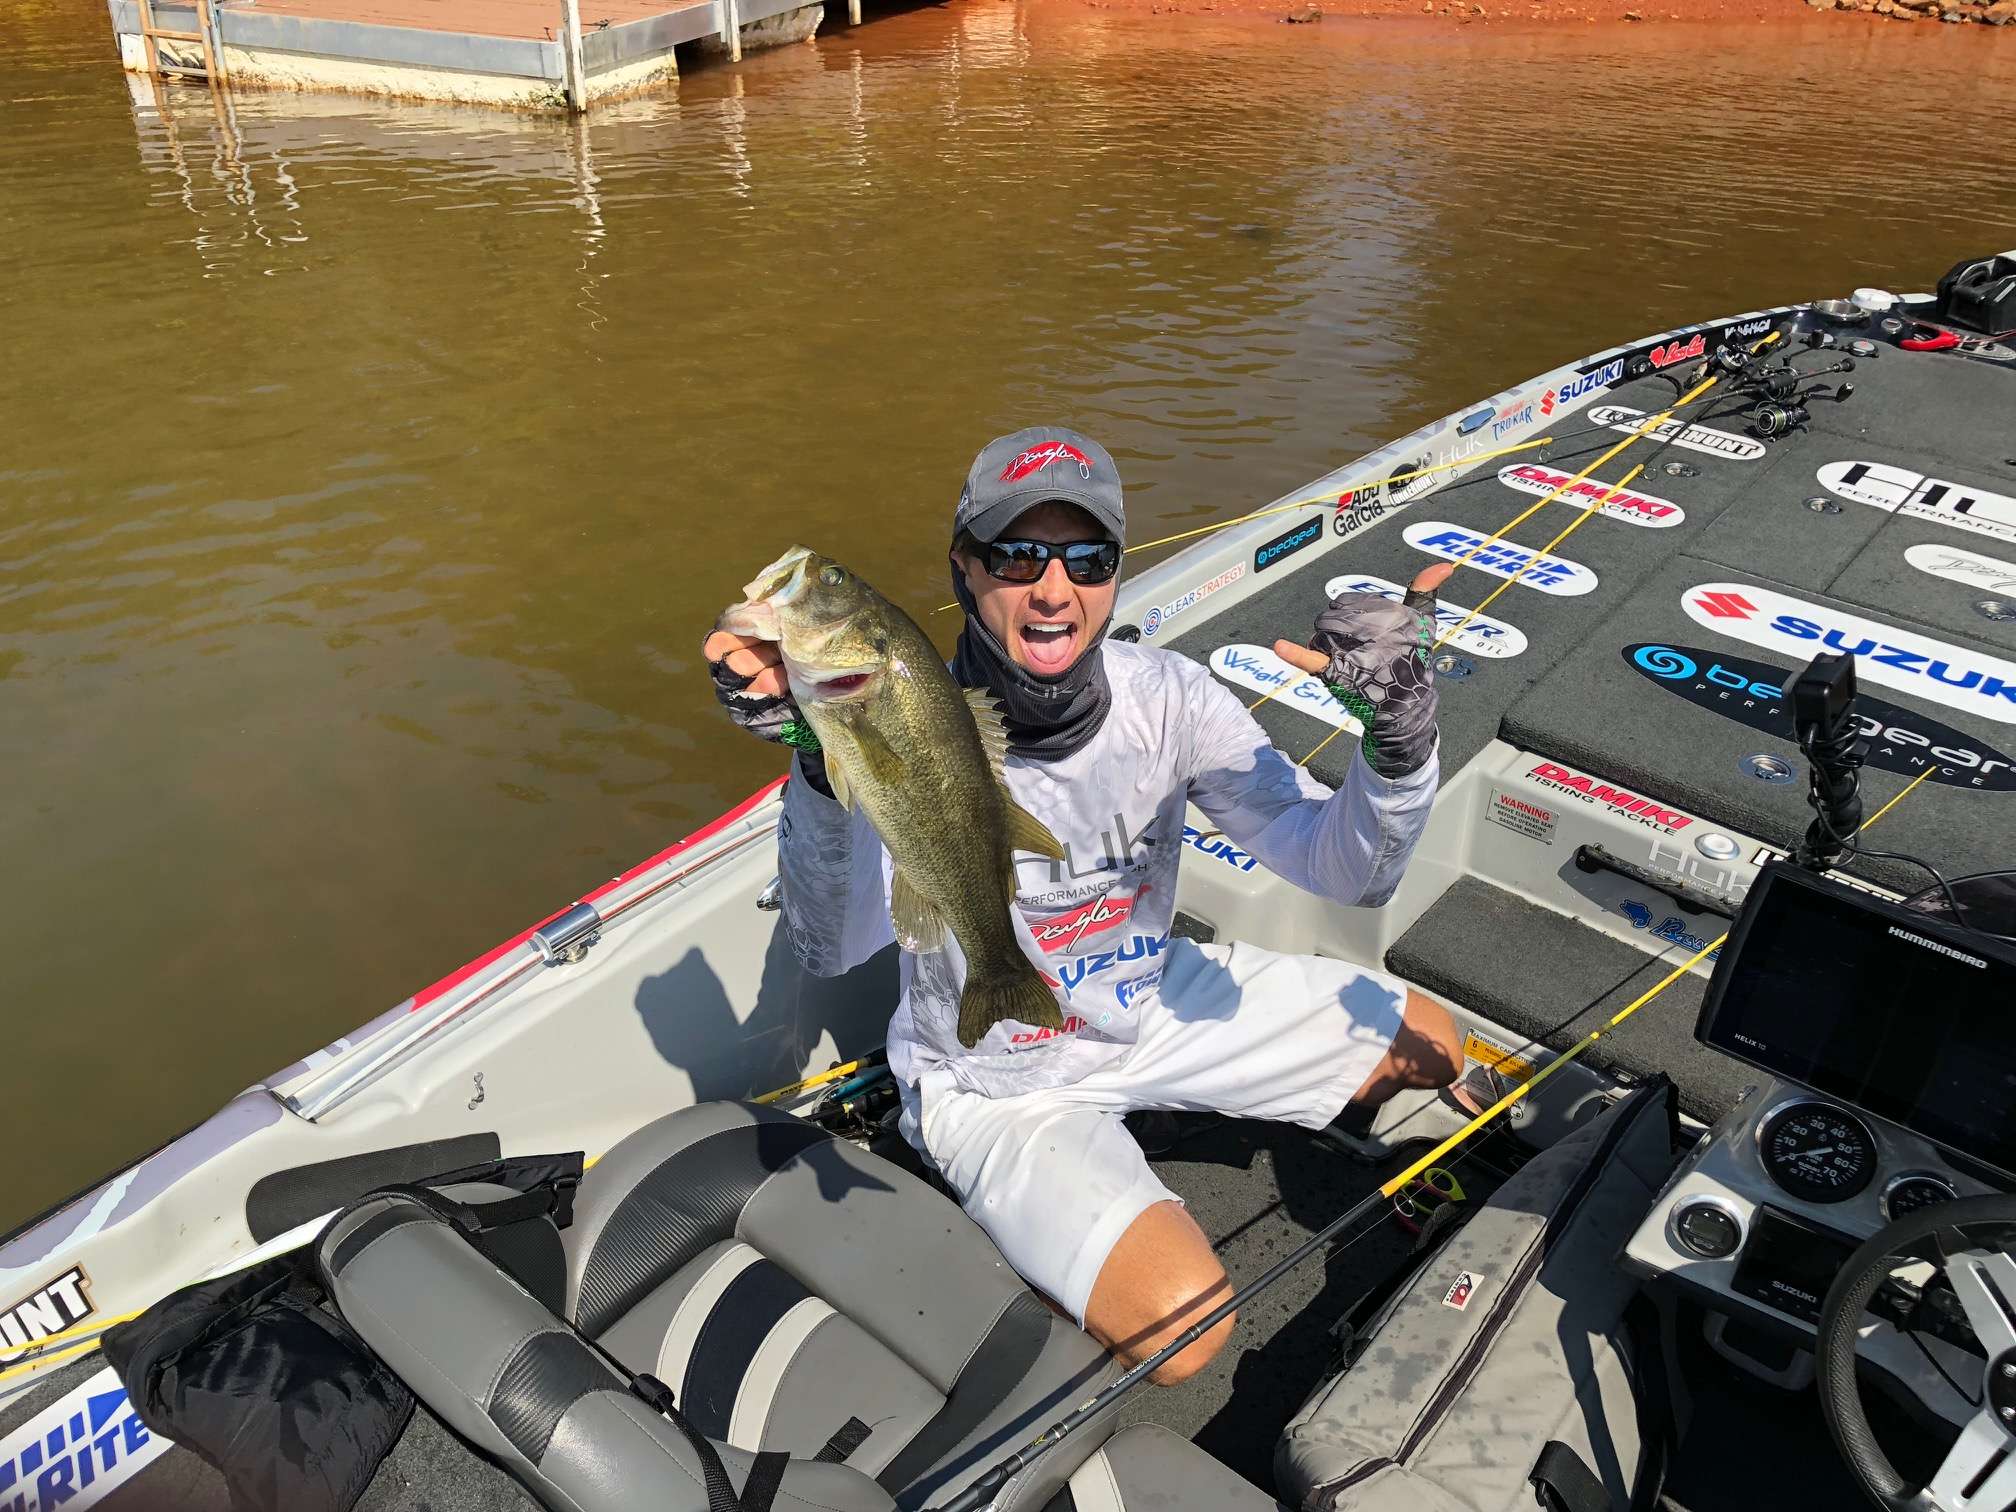 Chad Pipkens is all smiles after putting his fifth fish in the boat.